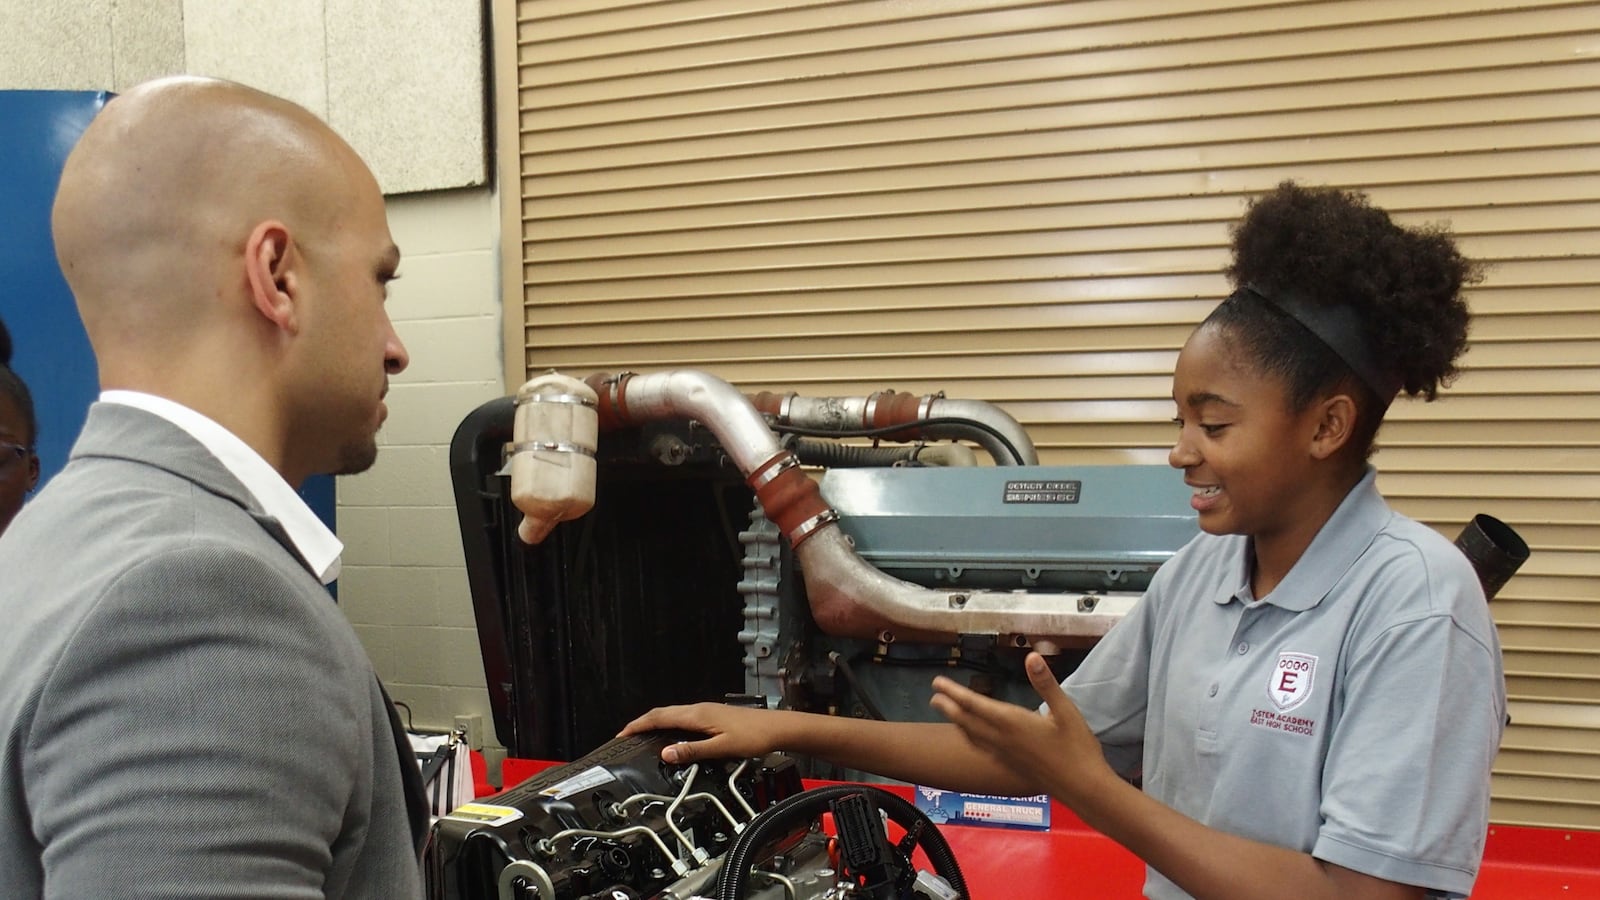 Kia Bolton, a freshman at the T-STEM Academy at East High School, explains what she's learning in the Memphis school's new diesel program.